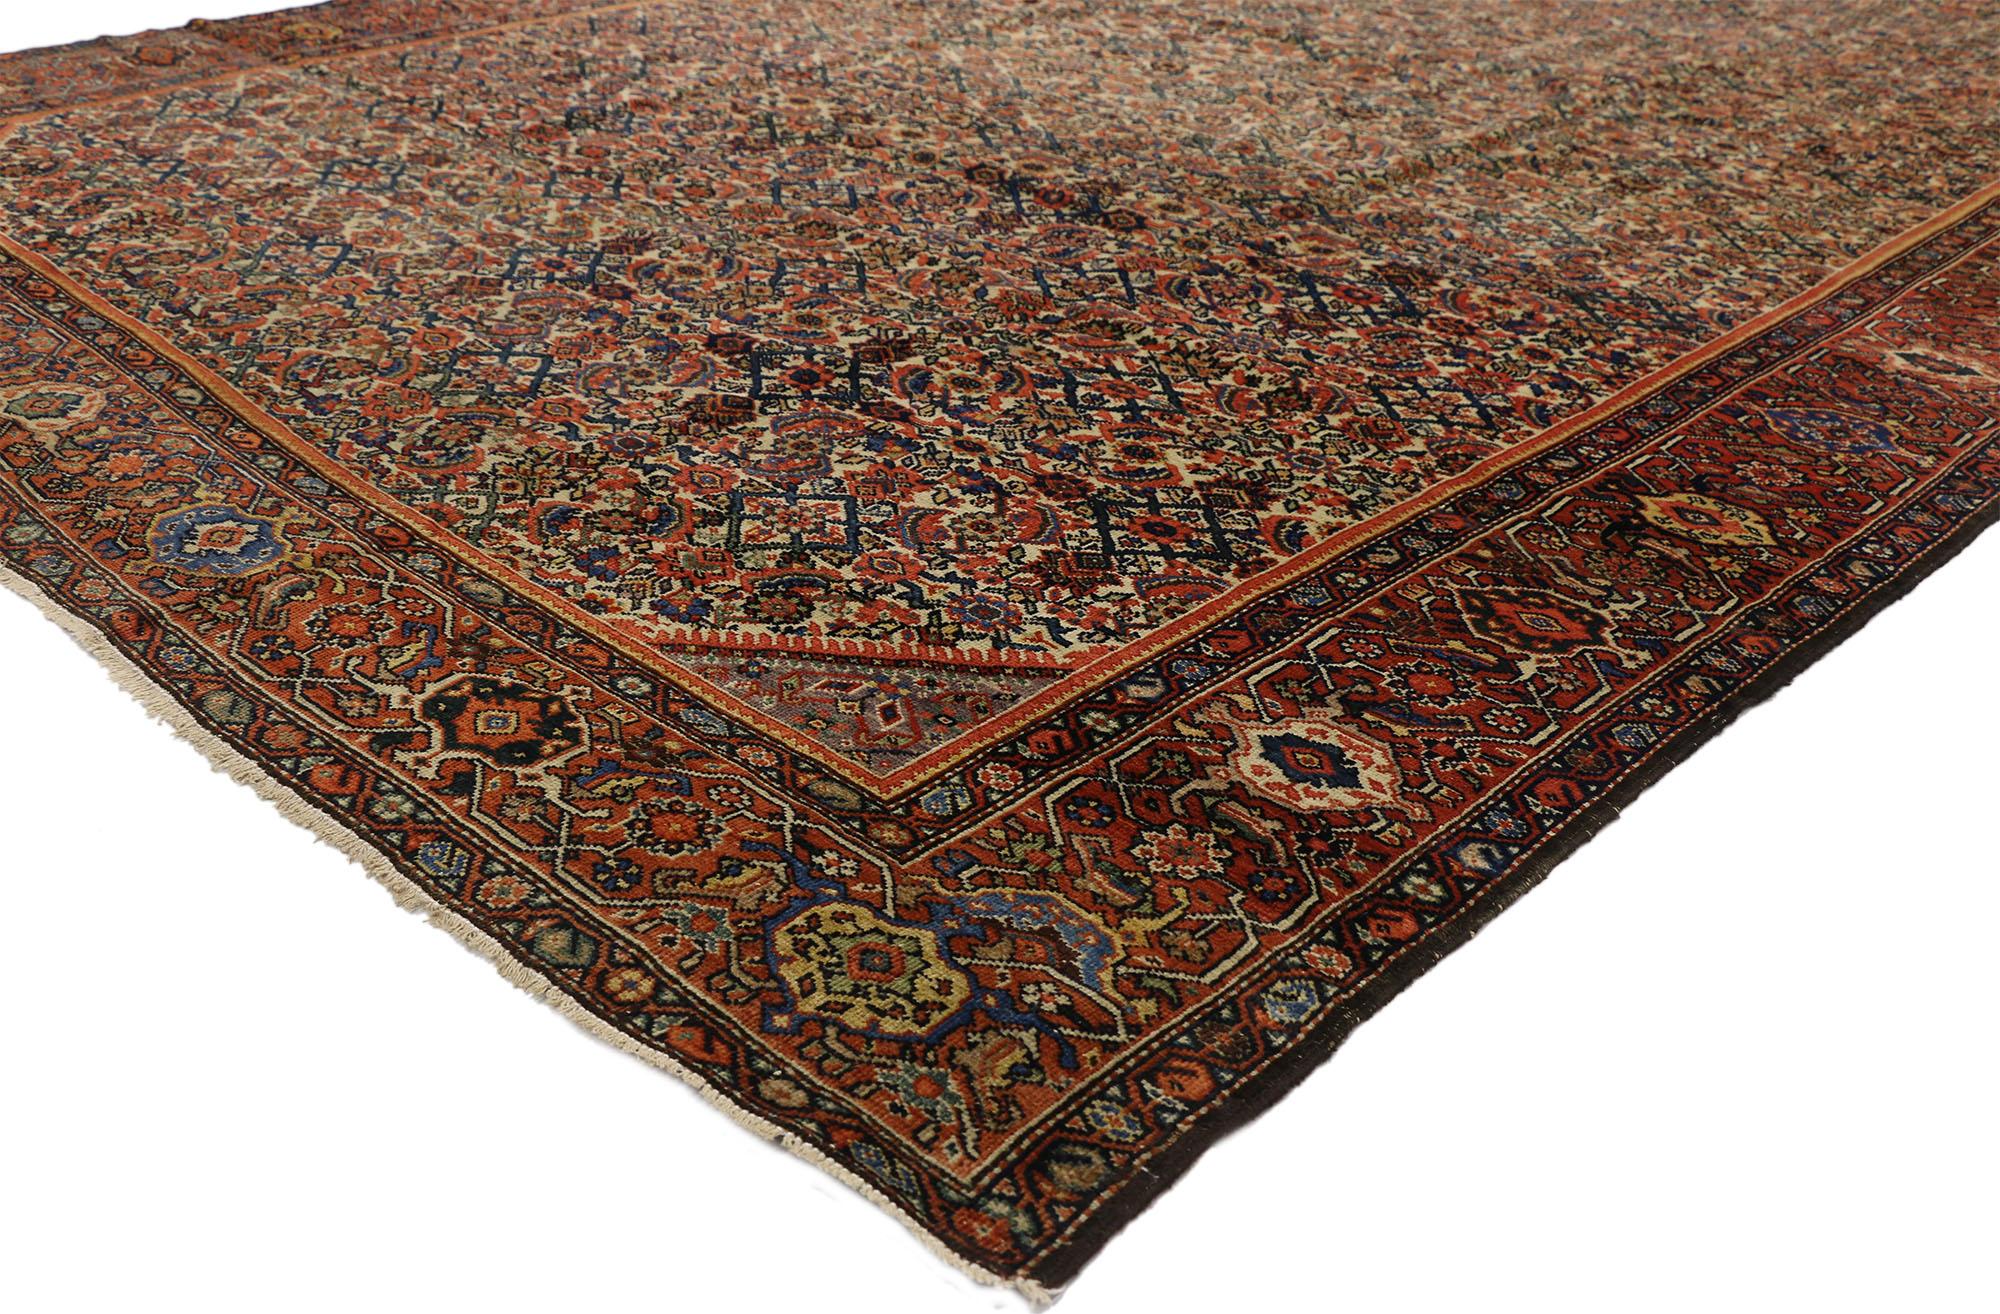 74035 Late 19th Century Antique Persian Farahan Rug with Modern Rustic English Style, 07'07 x 12'04. Sophisticated and full of character, this Late 19th Century Antique Persian Farahan Rug combines traditional character with modern style. With its